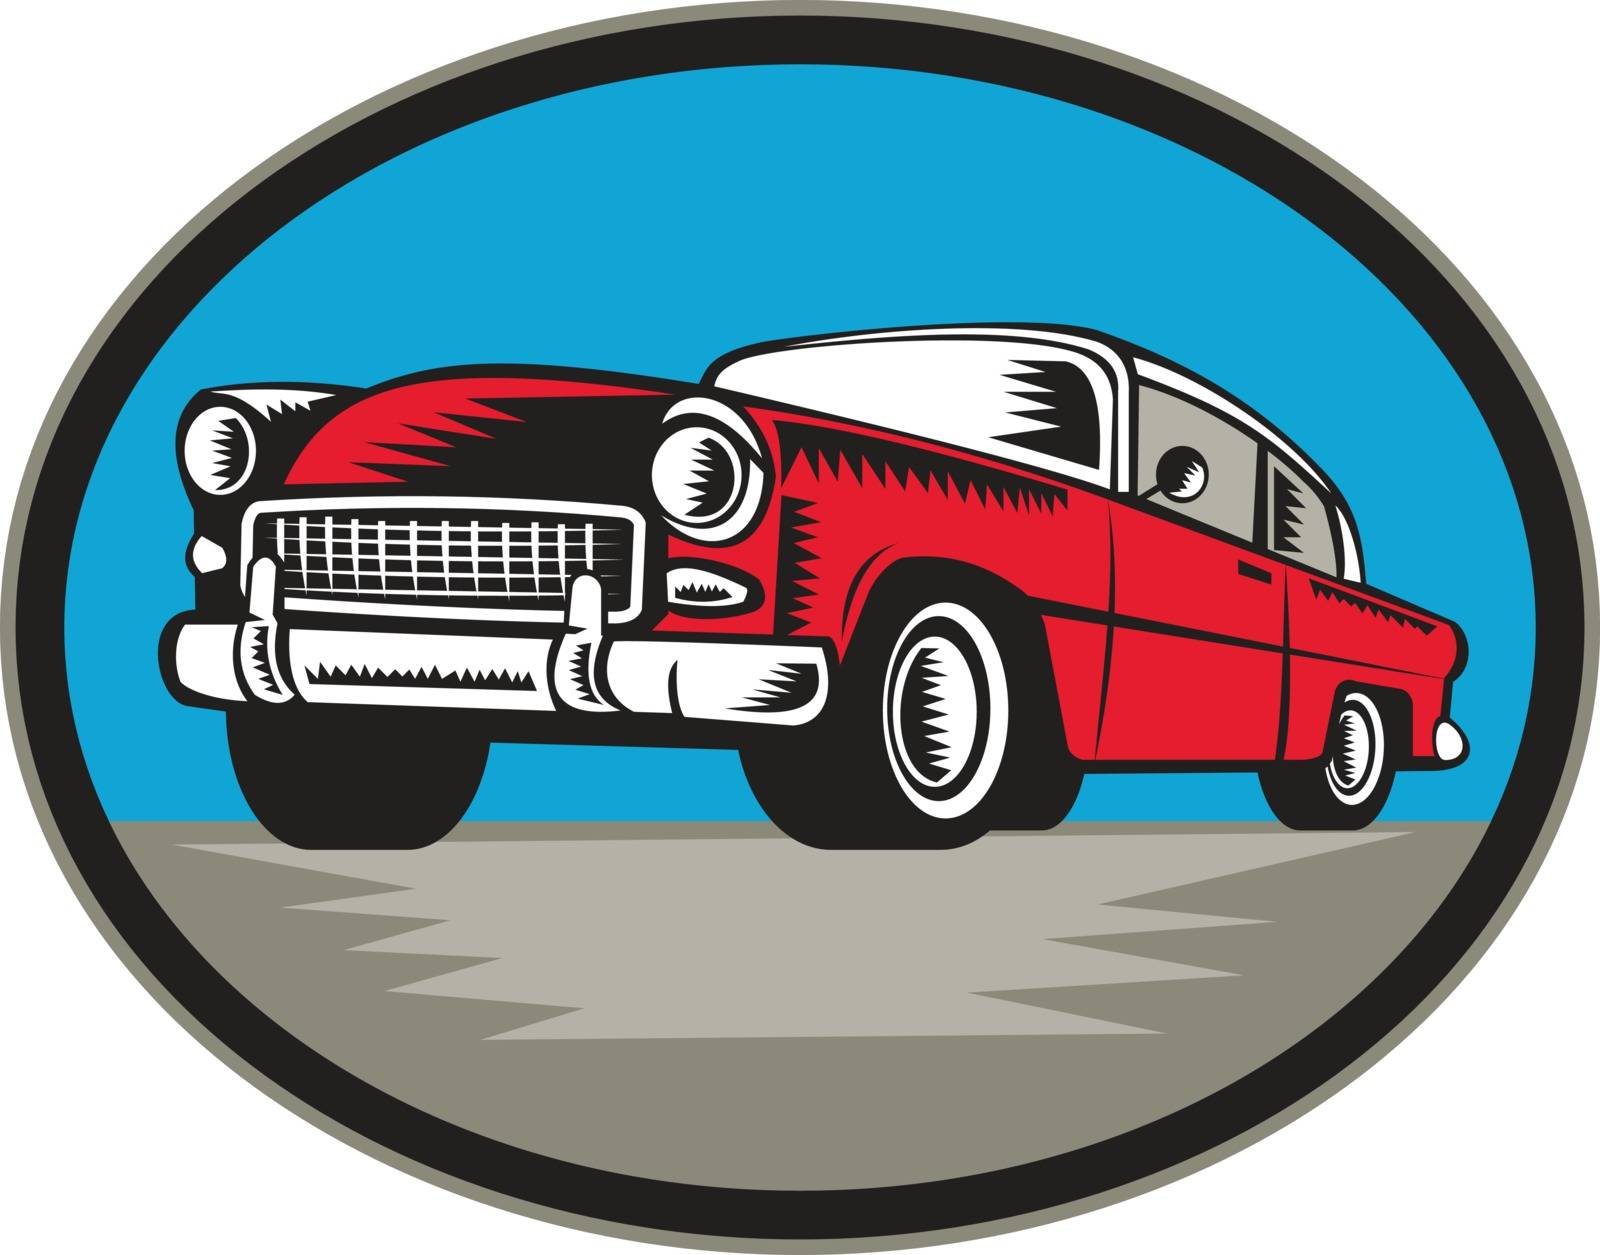 Illustration of a vintage classic car viewed from low angle set inside oval shape done in retro woodcut style.